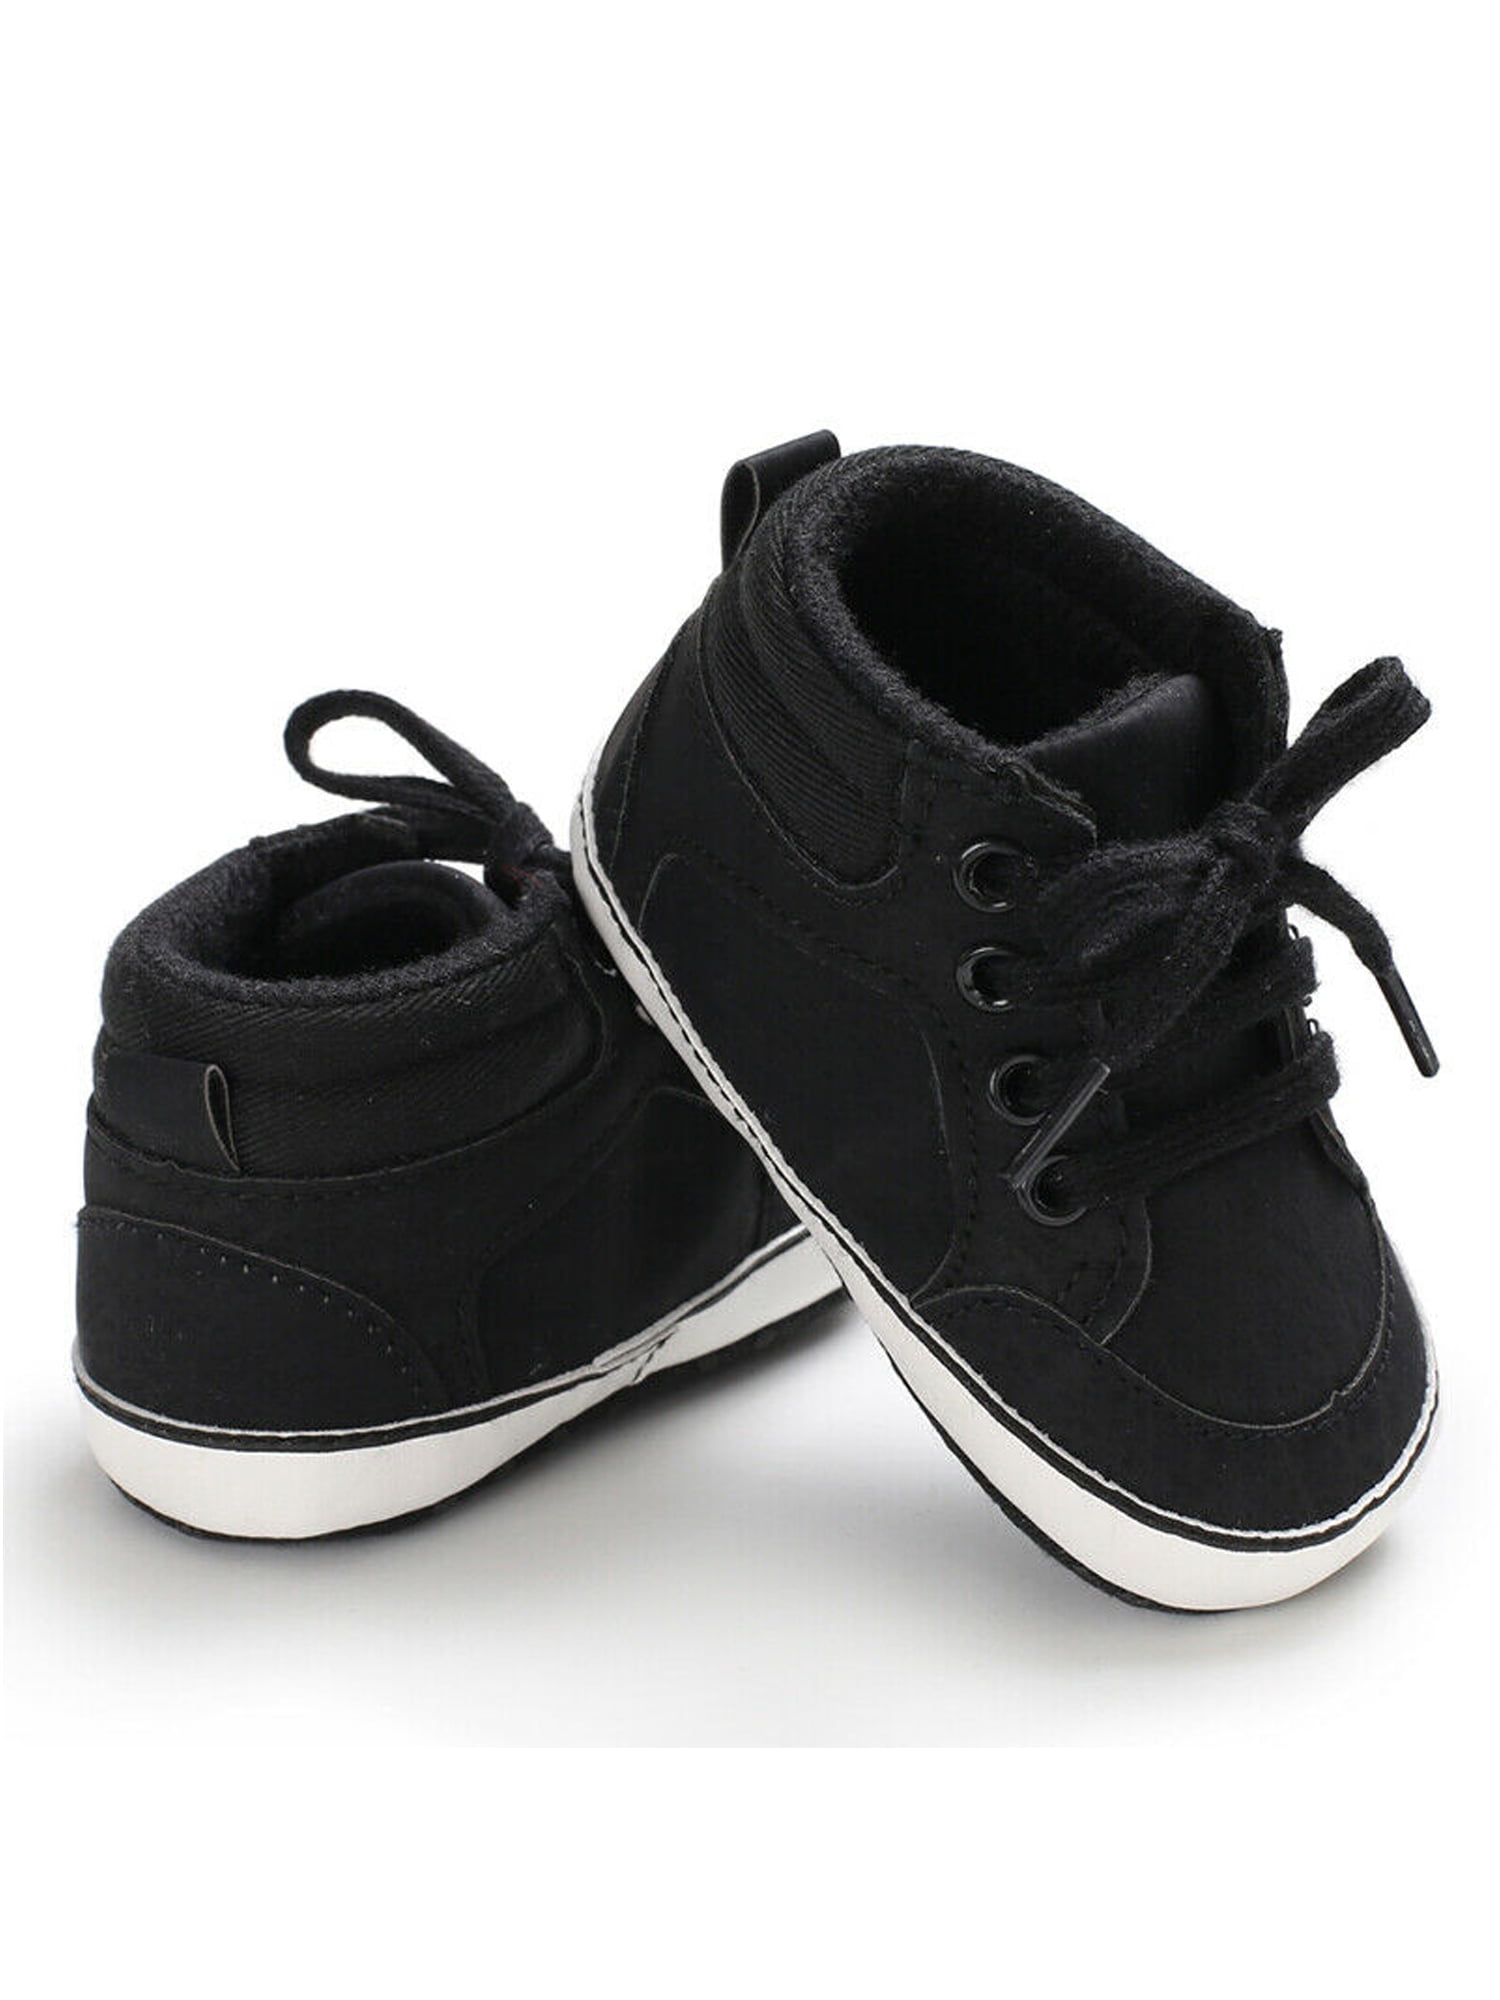 casual shoes for baby boy